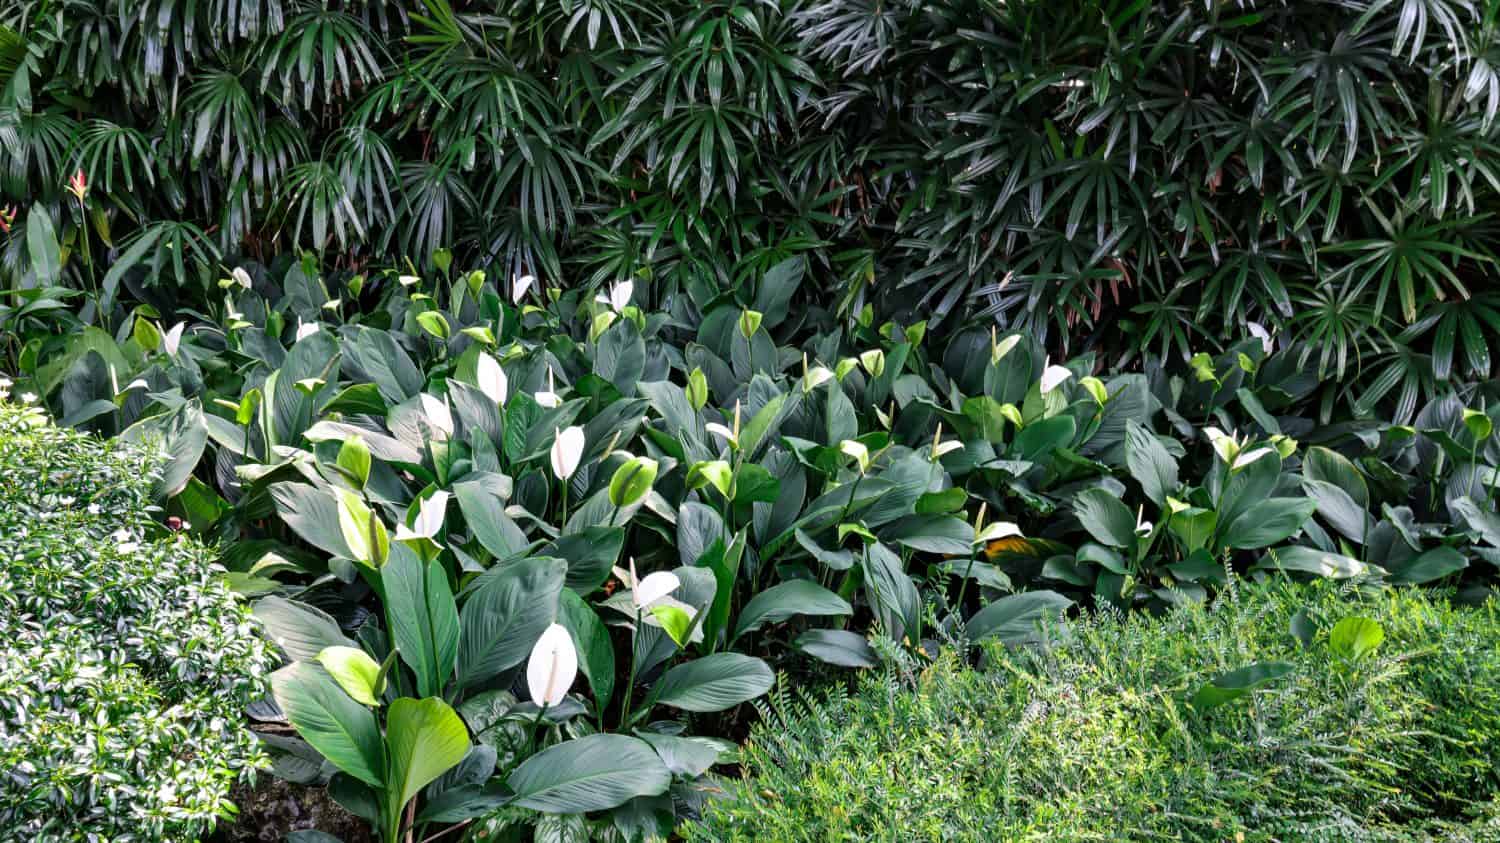 The Peace Lily (Spathiphyllum wallisii) flowers are produced in a spadix (flowery stem) surrounded by a spathe (modified leaf). Spathe is white when newly opened, turns green and then brown with age. 